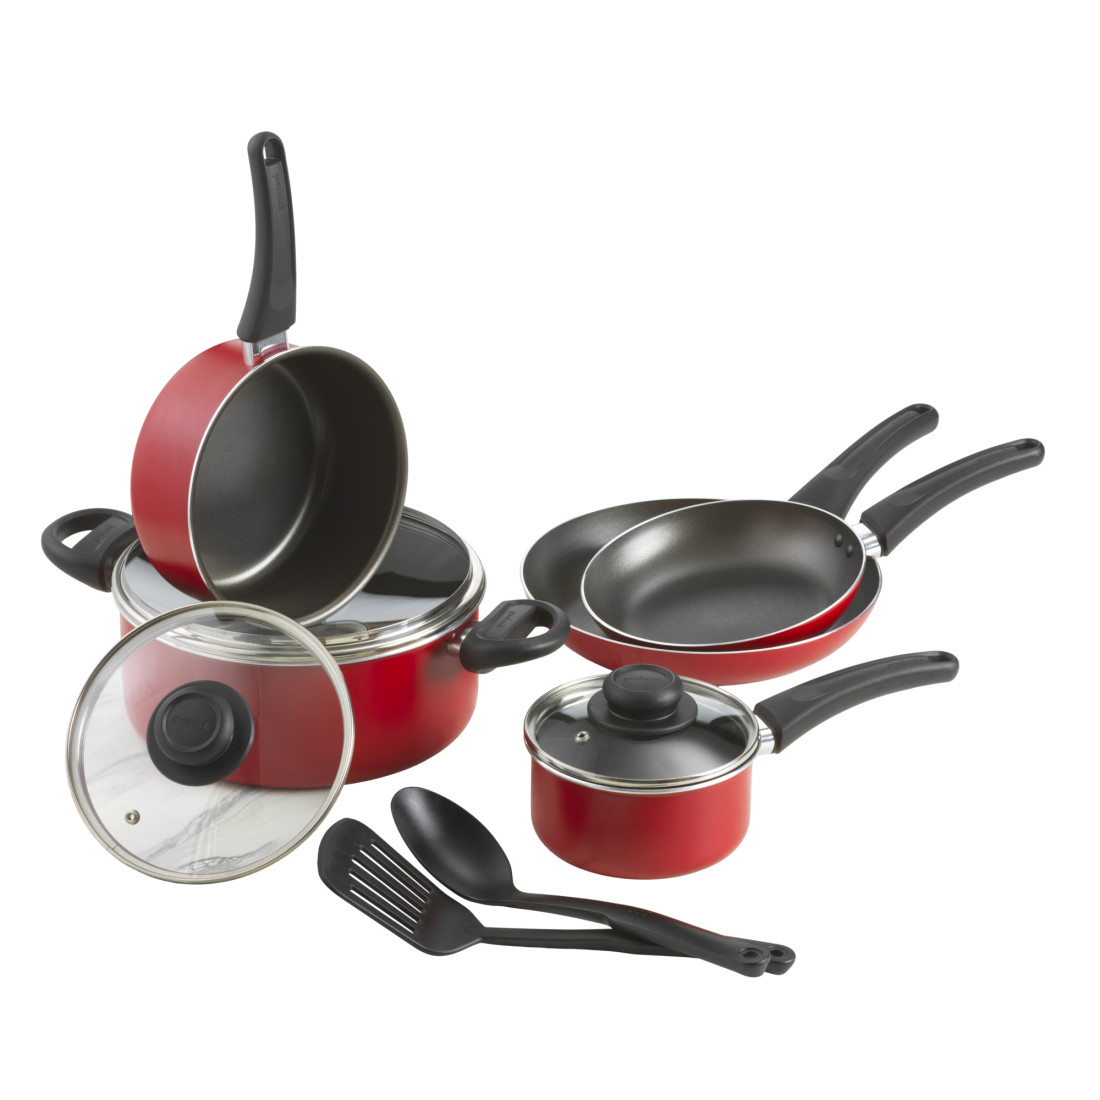 GoodCook Introduces Healthy Ceramic Cookware Set